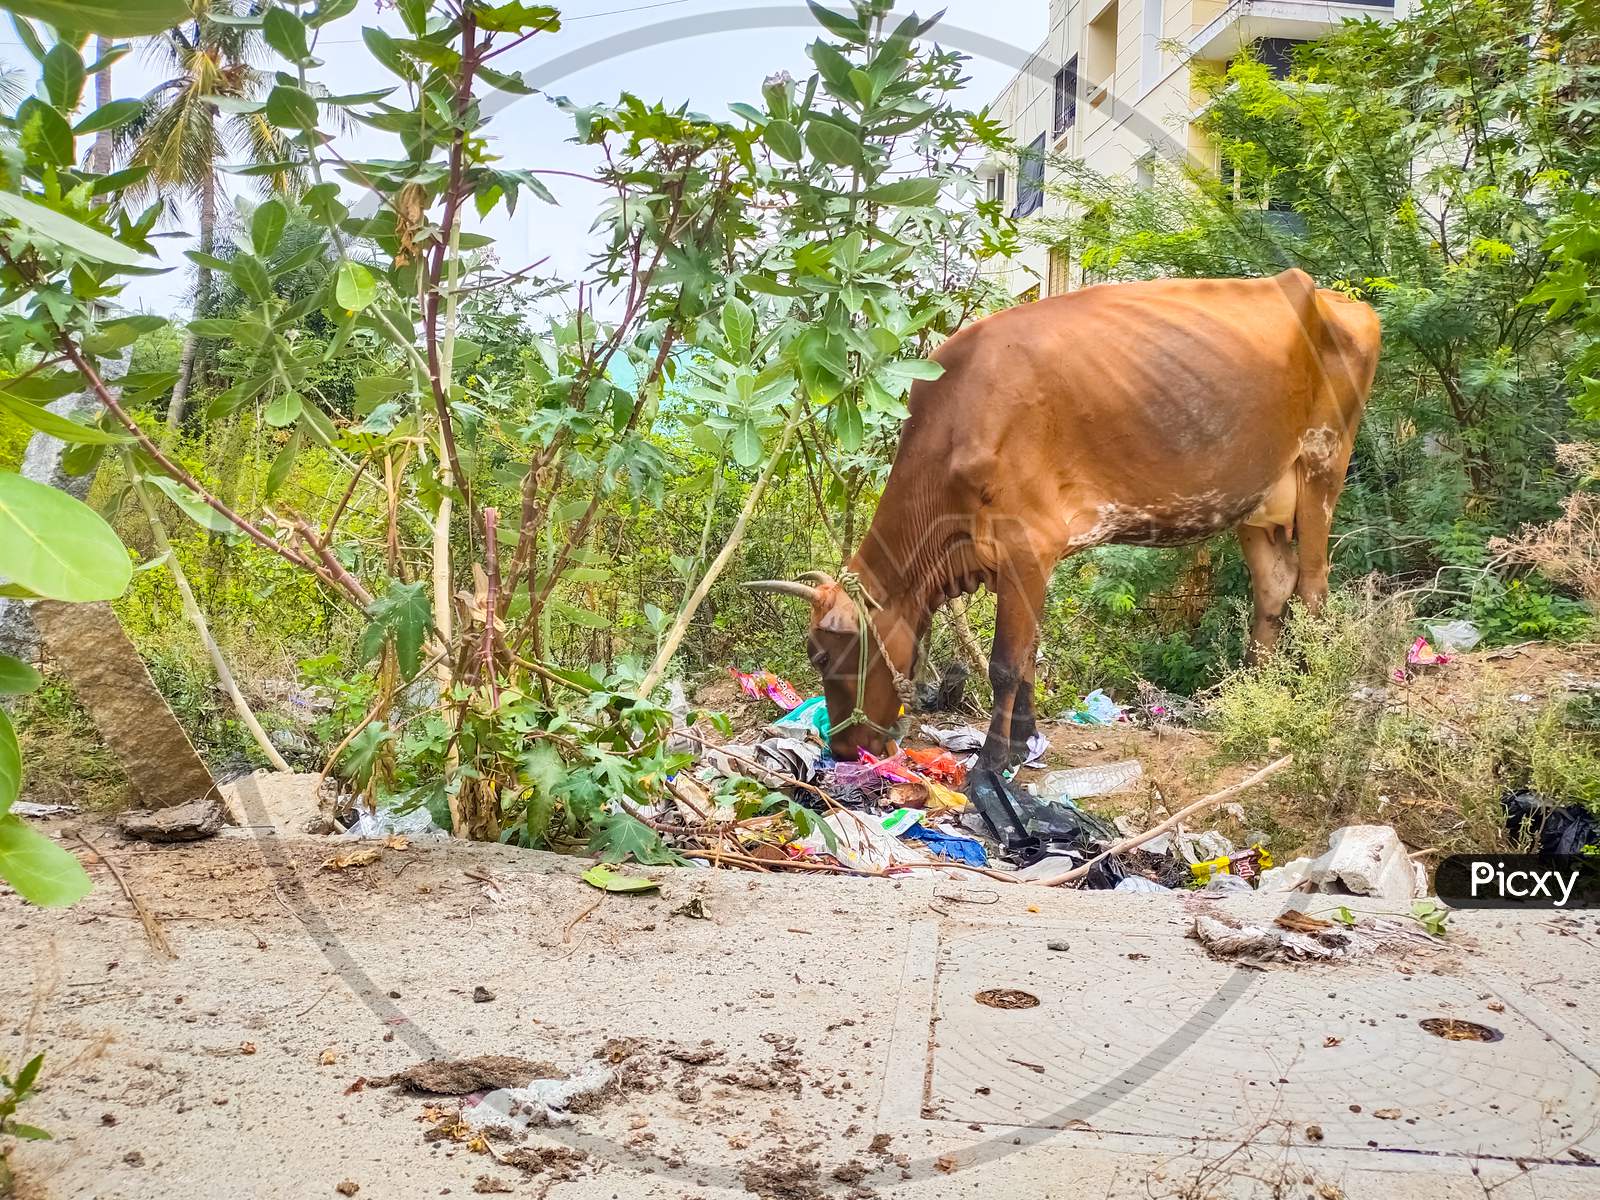 Chennai, India, October 26Th 2020: Domestic Cow Eating Waste Plastic Bag In Street Garbage. Cows Eating Garbage Dump Household Waste, Deadly Eating Plastic Bags. Garbage Dirt Poverty India.